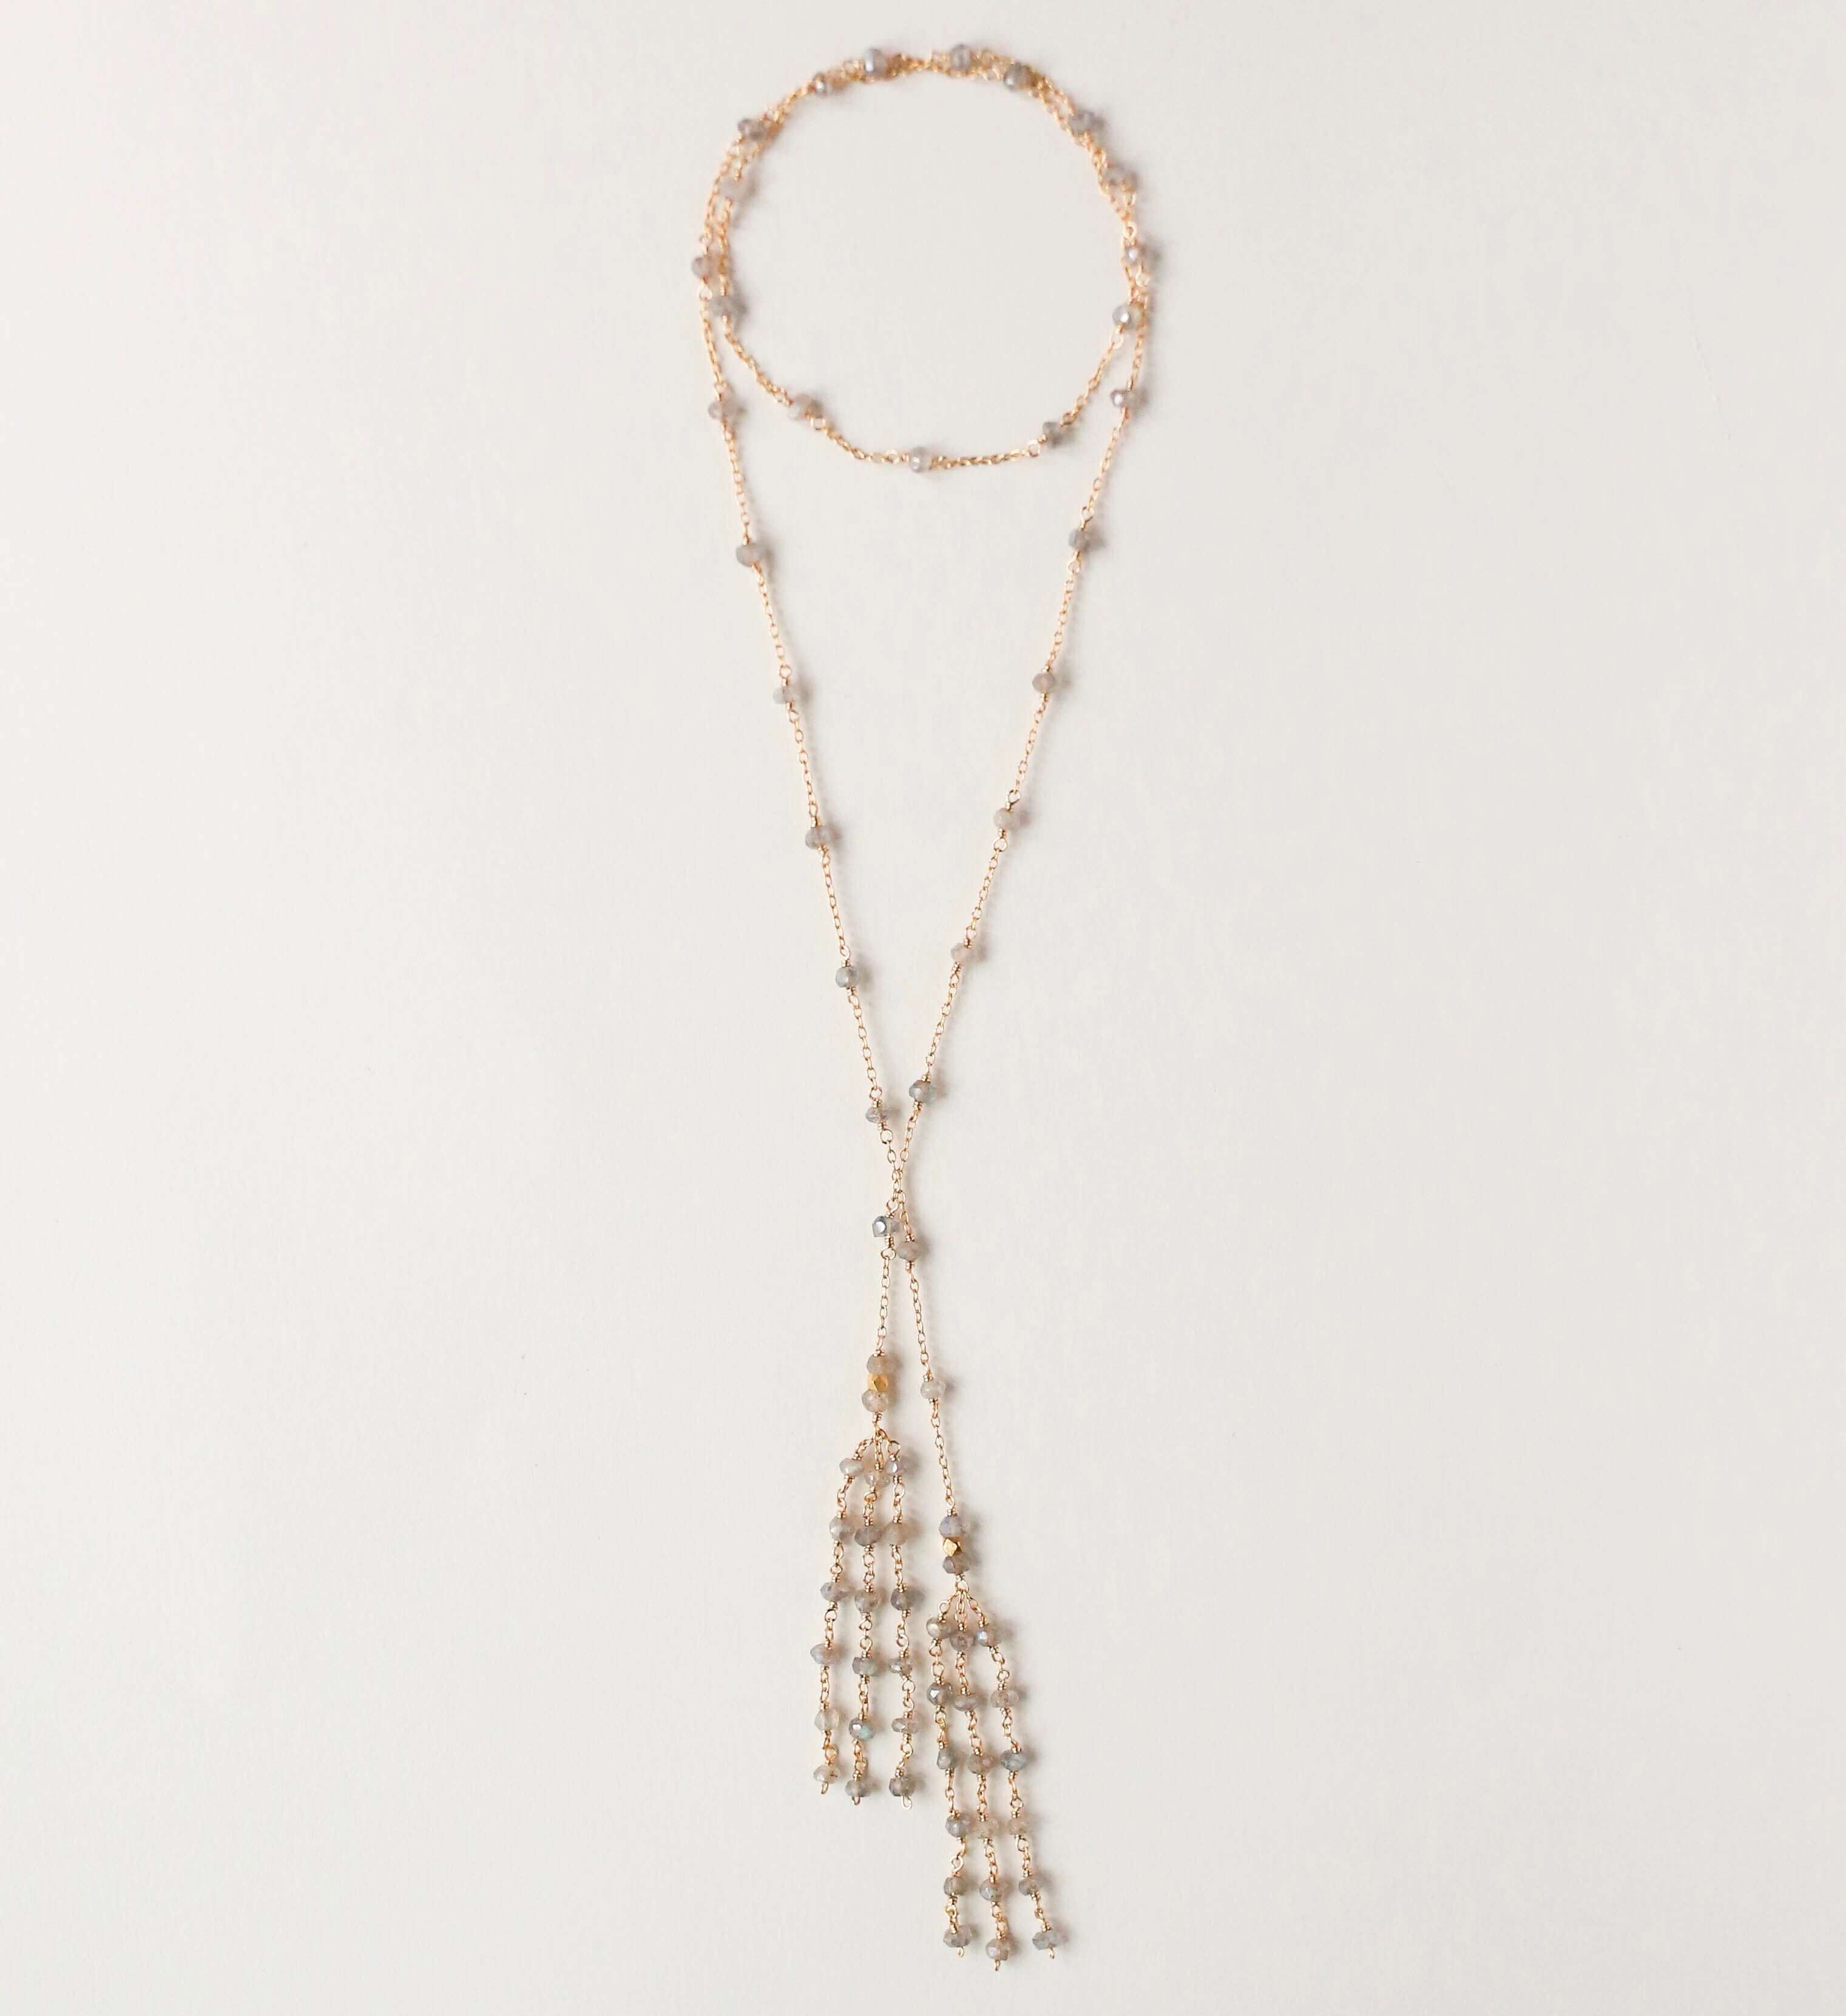 14k Gold plated Labradorite Lariat Necklace with a stunning tassel